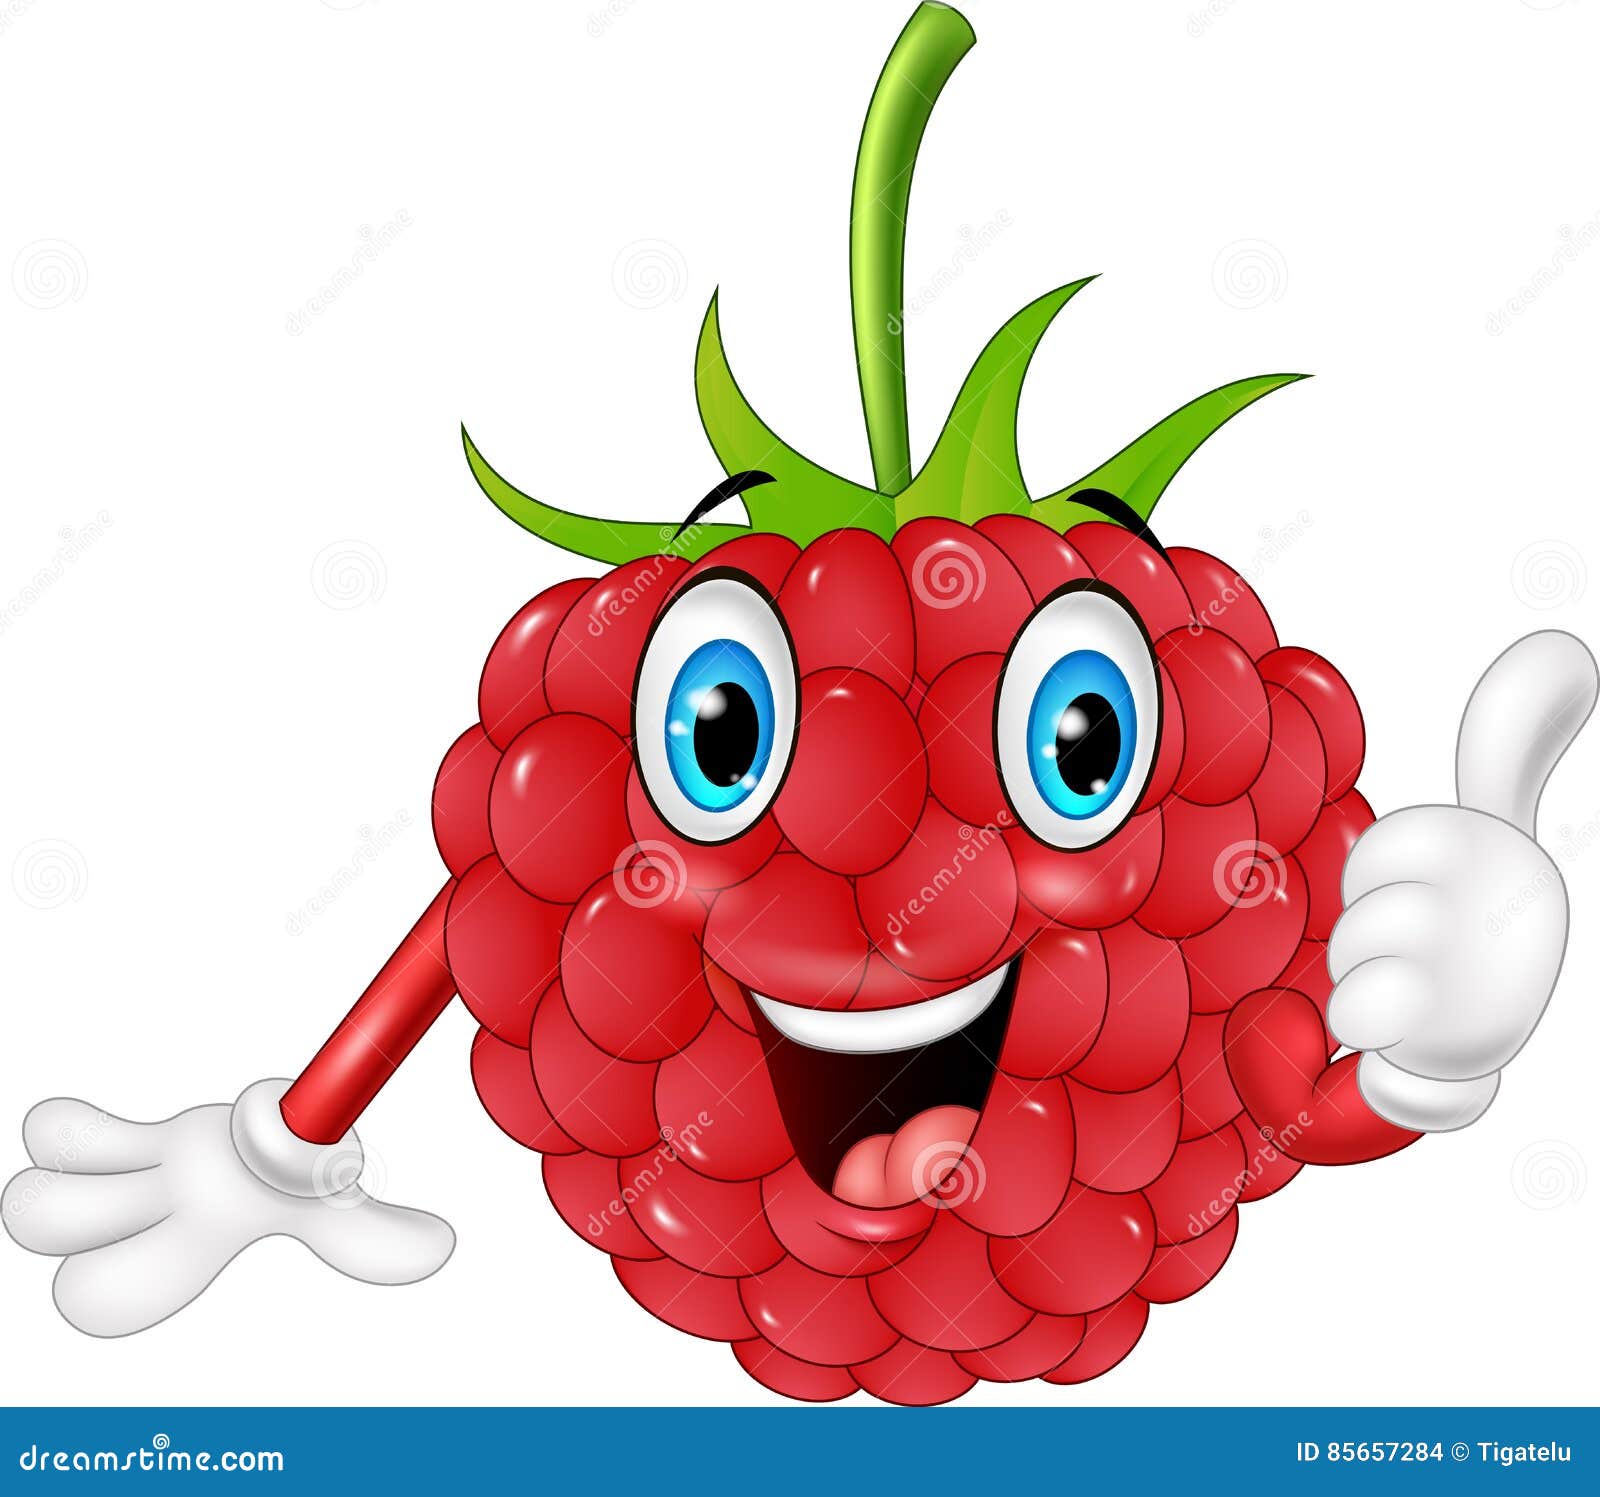 Cartoon Raspberry With Green Leaves Isolated On White Background Vector ...